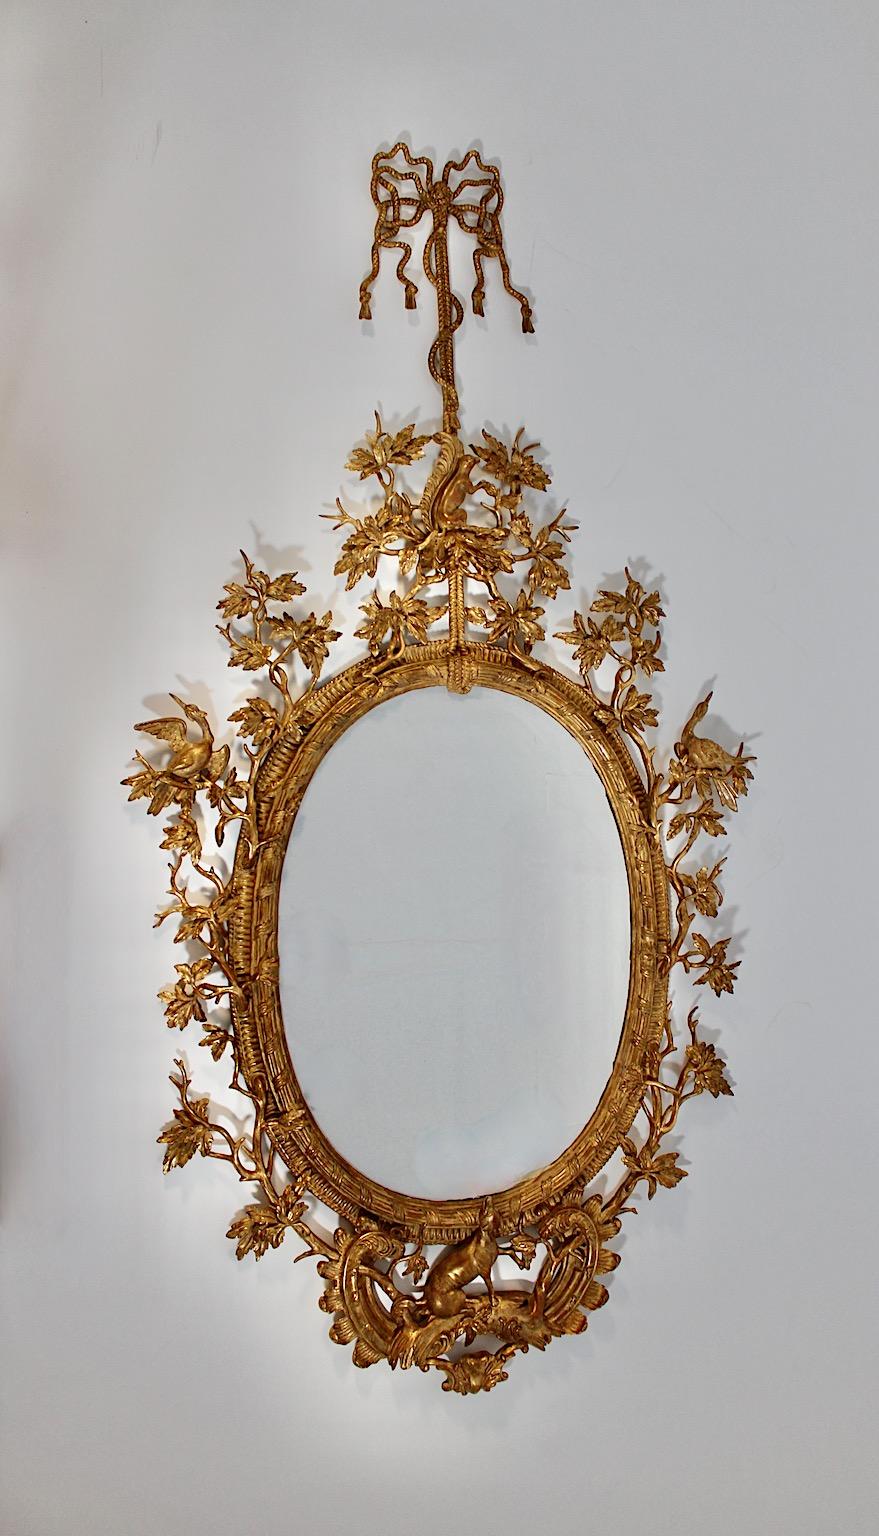 Antique gilt hand carved lime wood wall mirror or floor mirror, circa 1830.
A magnificent and beautiful wall mirror, floor mirror or full length mirror from gilt hand carved lime wood circa 1830 in the style and very similar to designs by Thomas